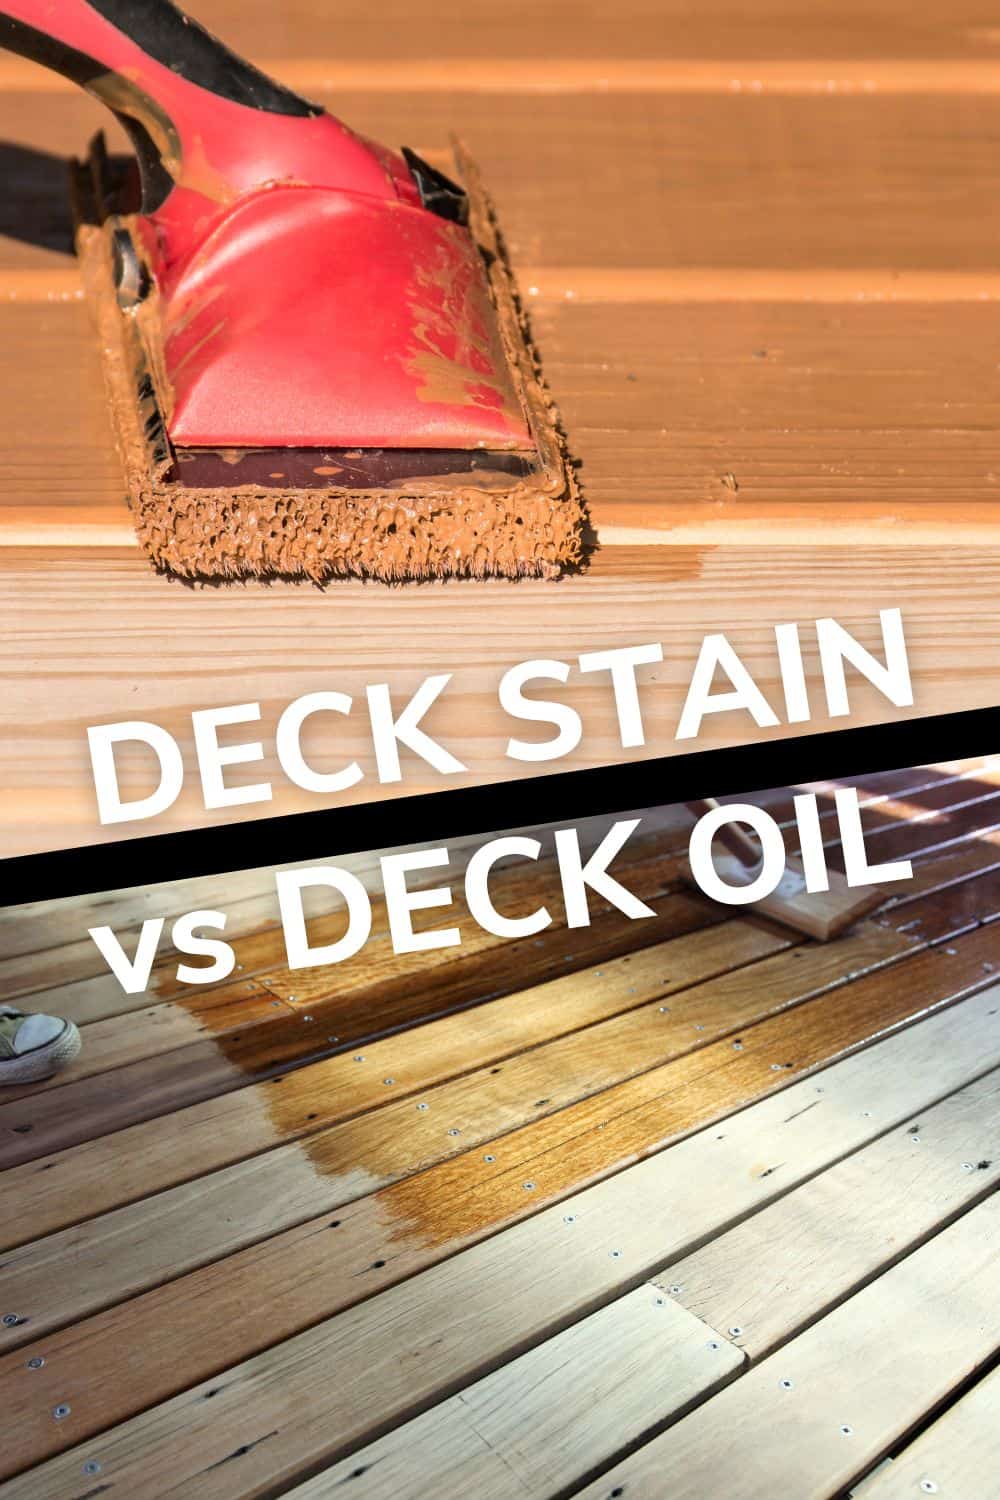 Decking Oil or Stain: What Should I Use On My Deck? - Making Manzanita